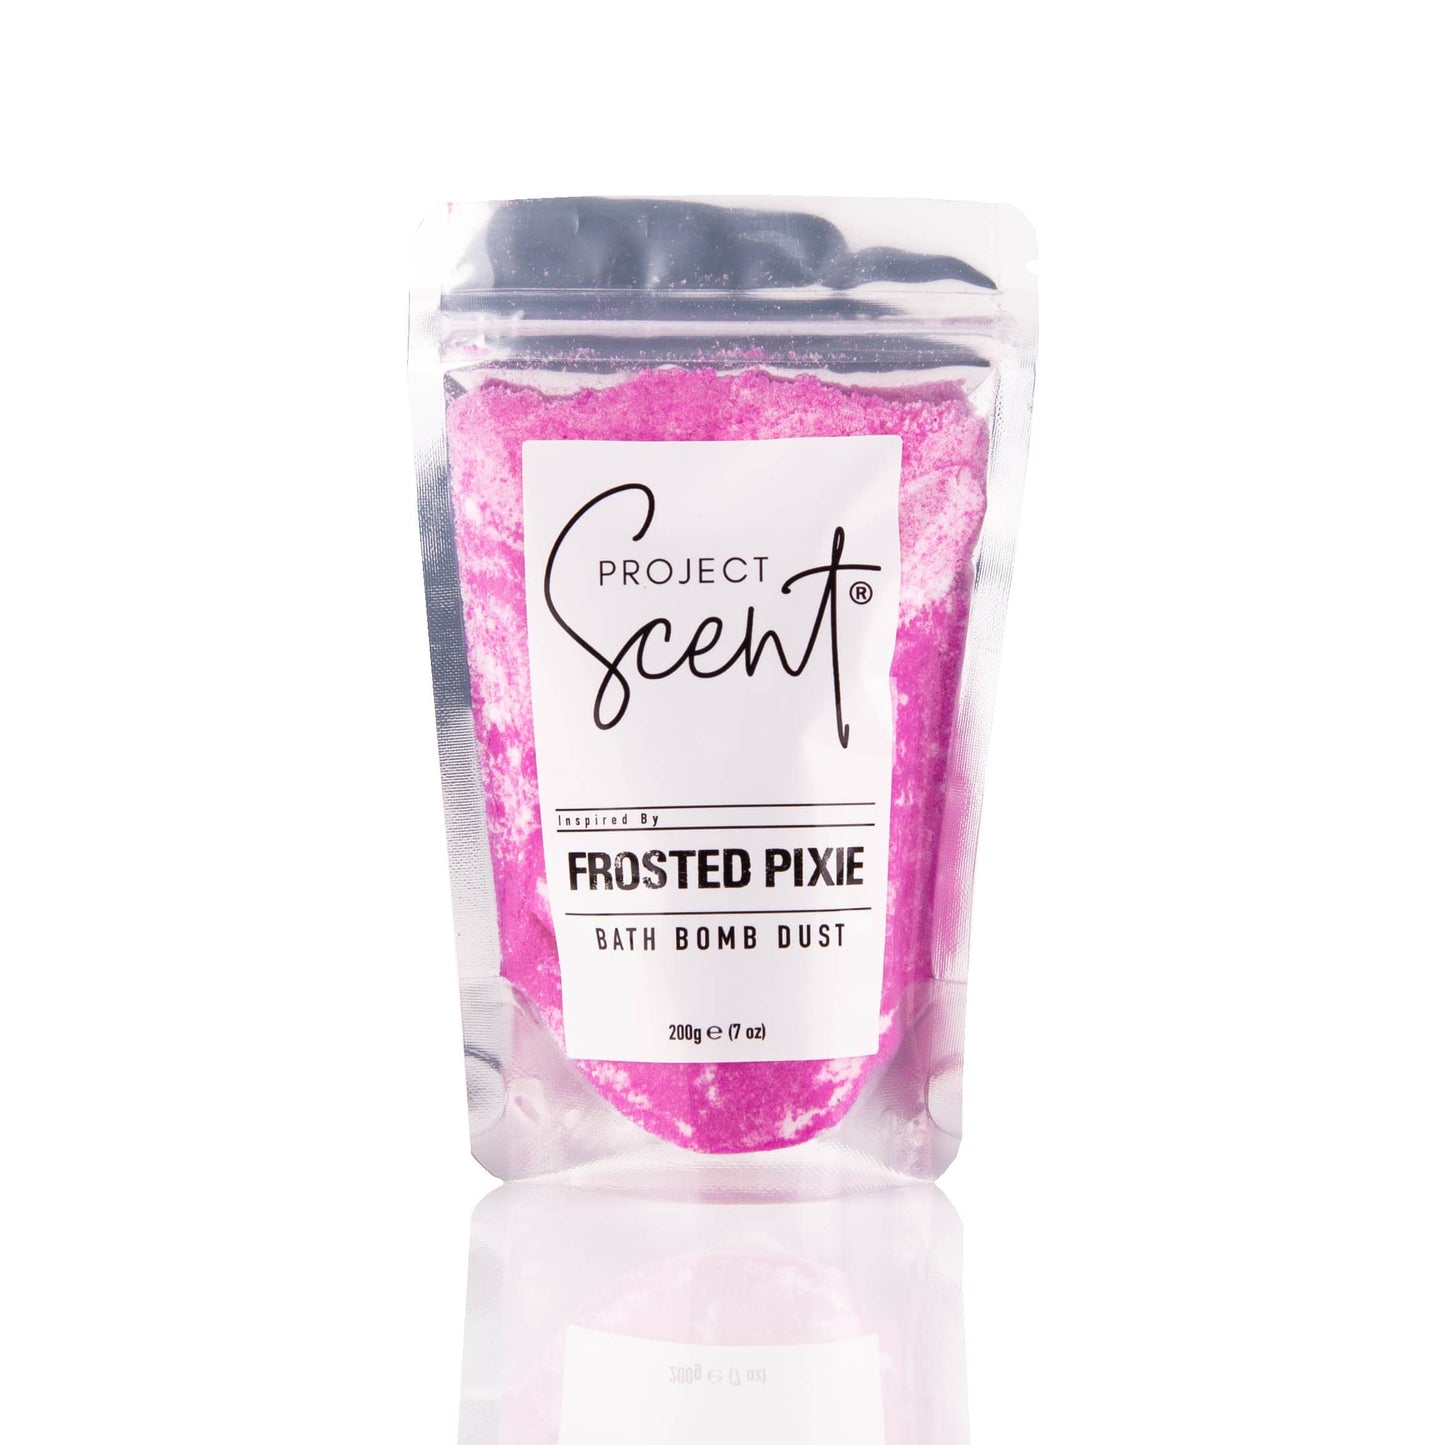 Project Scent Frosted Pixie Bath Bomb Dust 200g & 400g